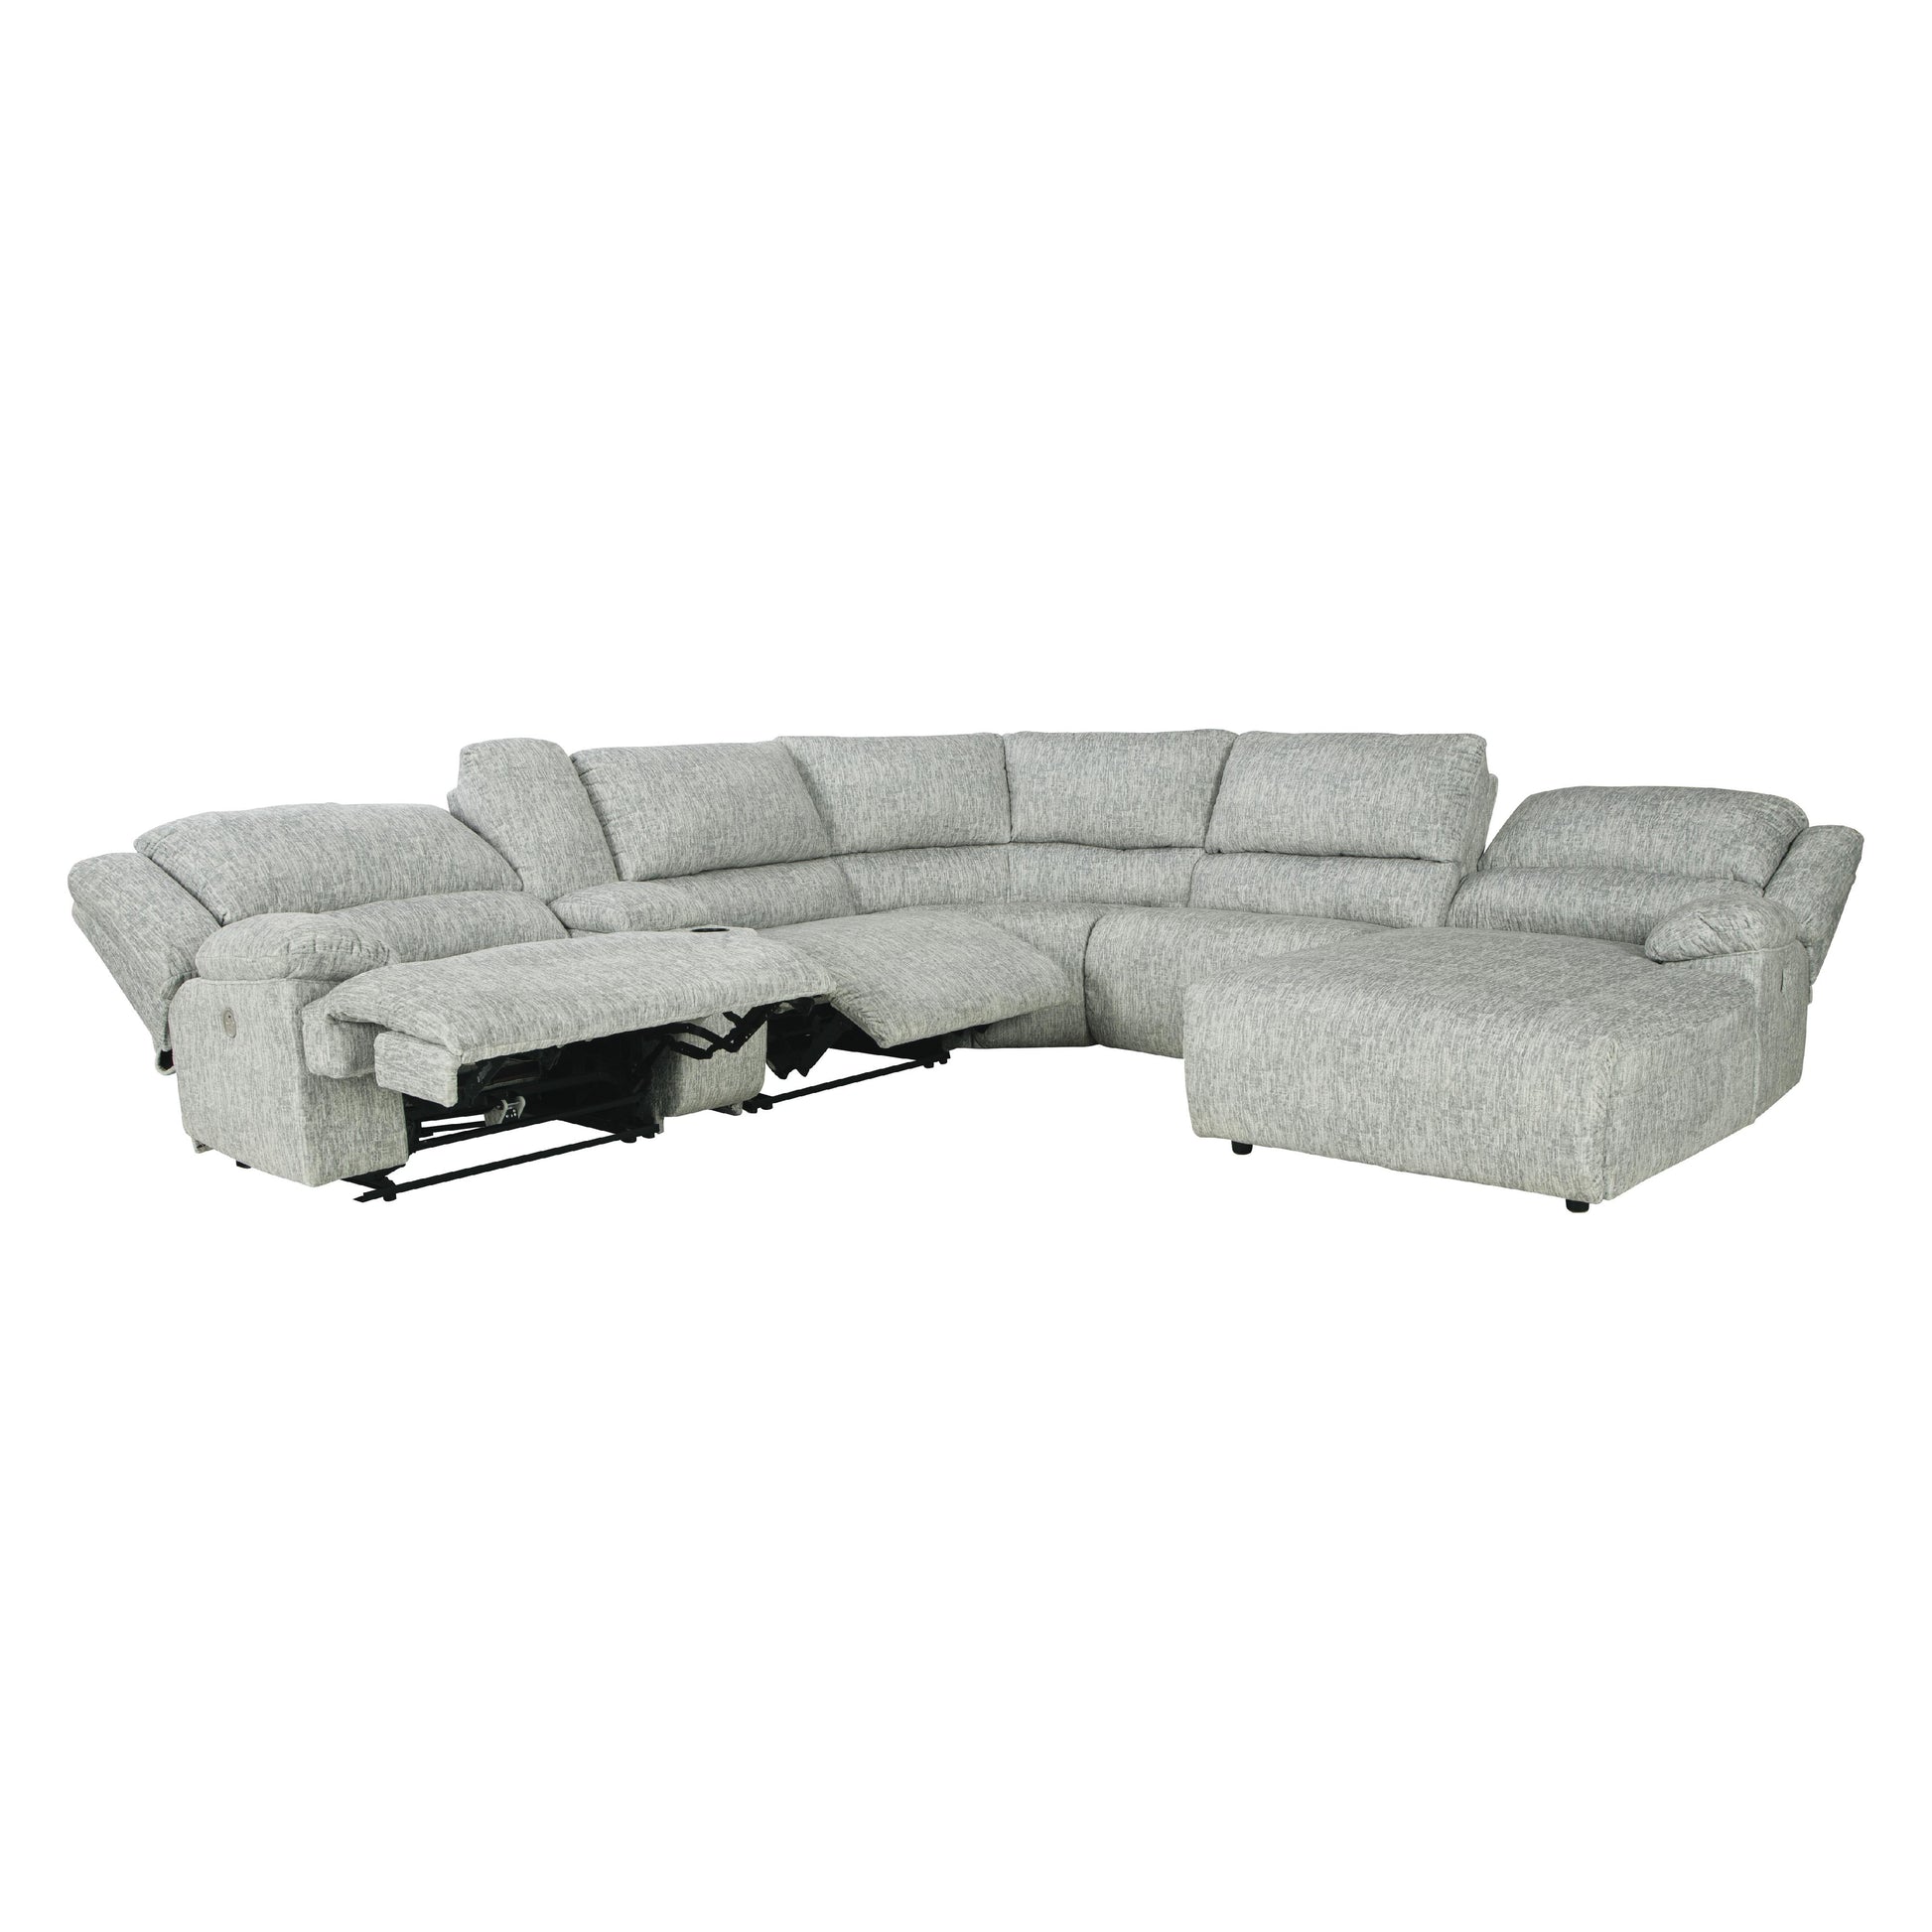 Signature Design by Ashley McClelland Power Reclining Fabric 6 pc Sectional 2930258/2930257/2930219/2930277/2930246/2930297 IMAGE 2